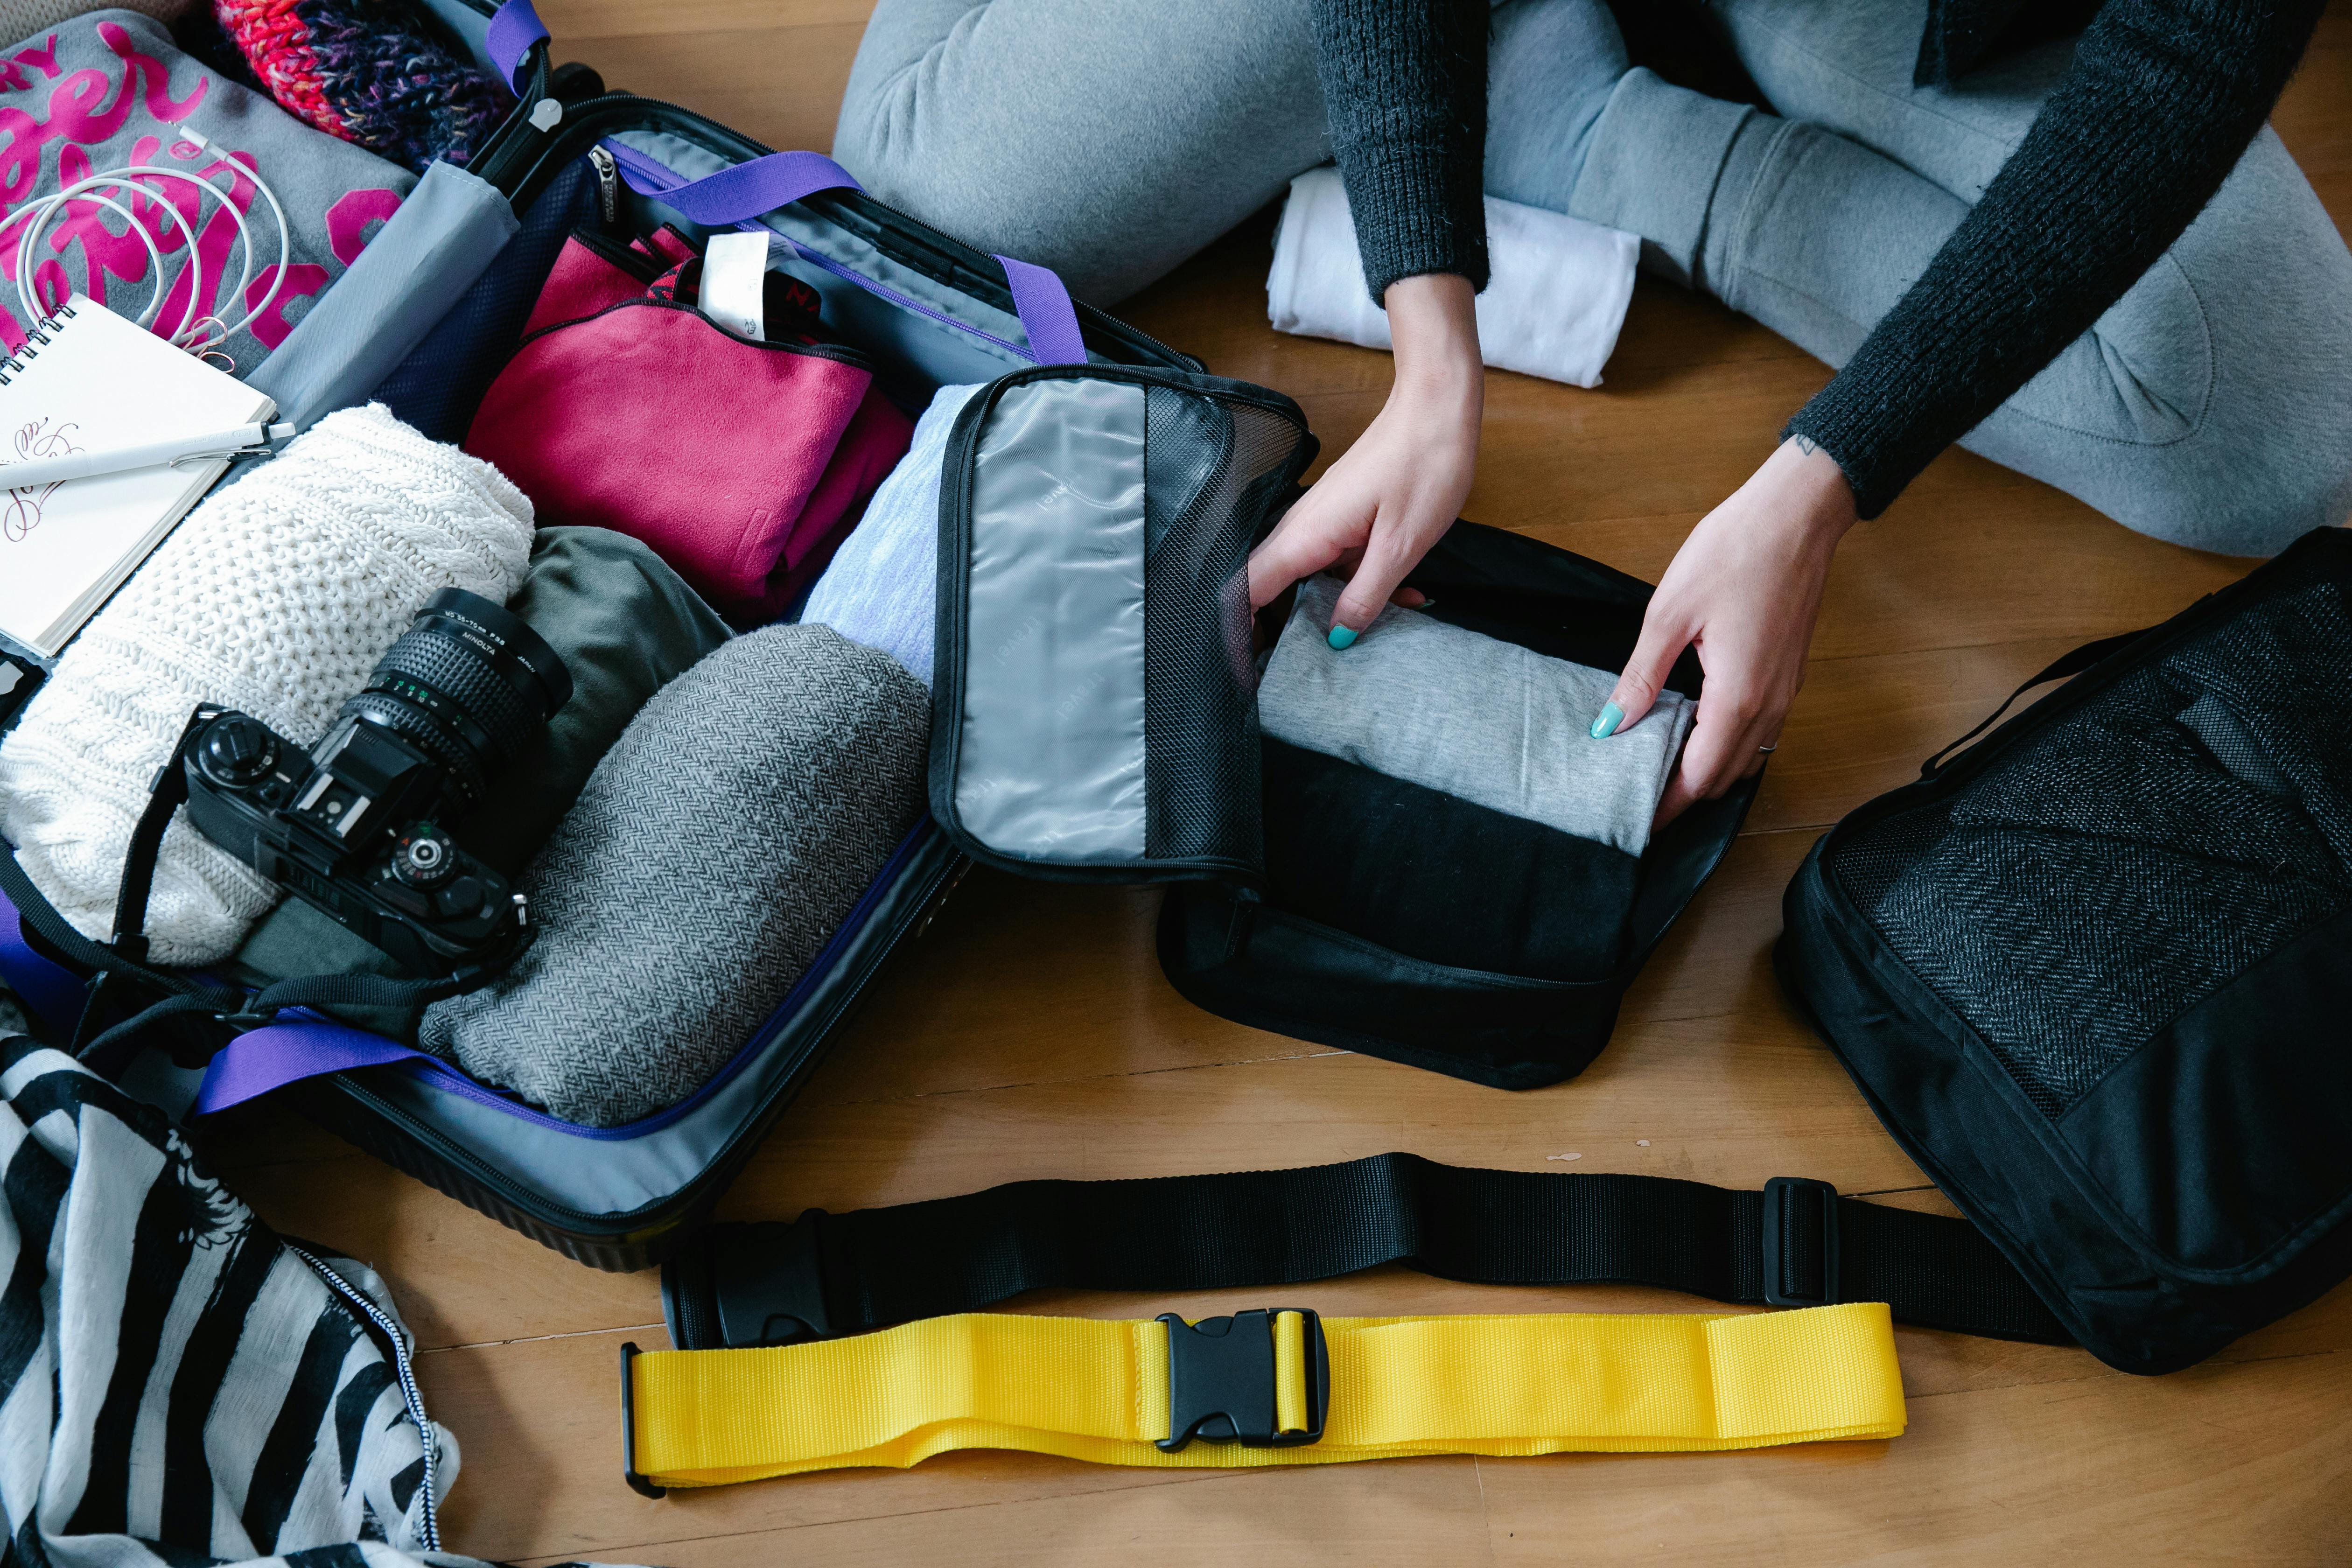 A person packing her bags | Source: Pexels